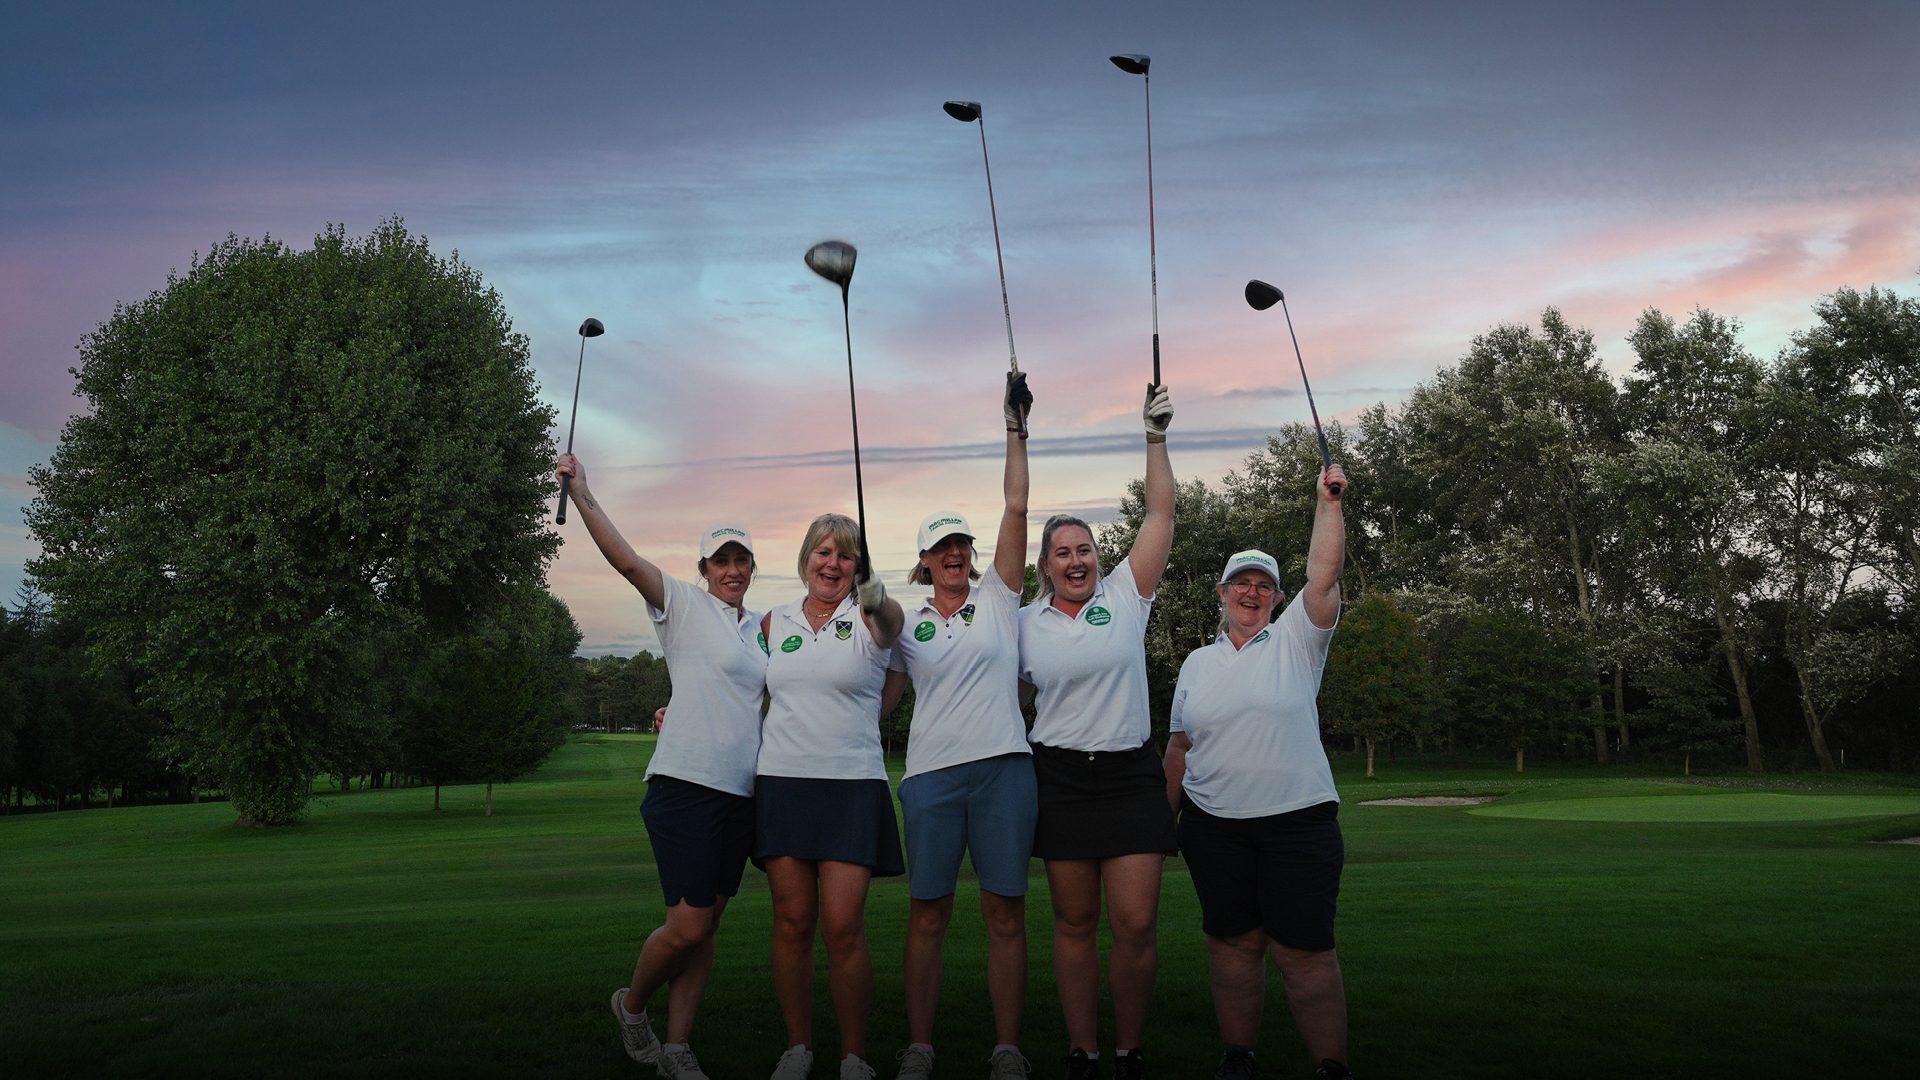 A group of women posing for a photo on a golf course.